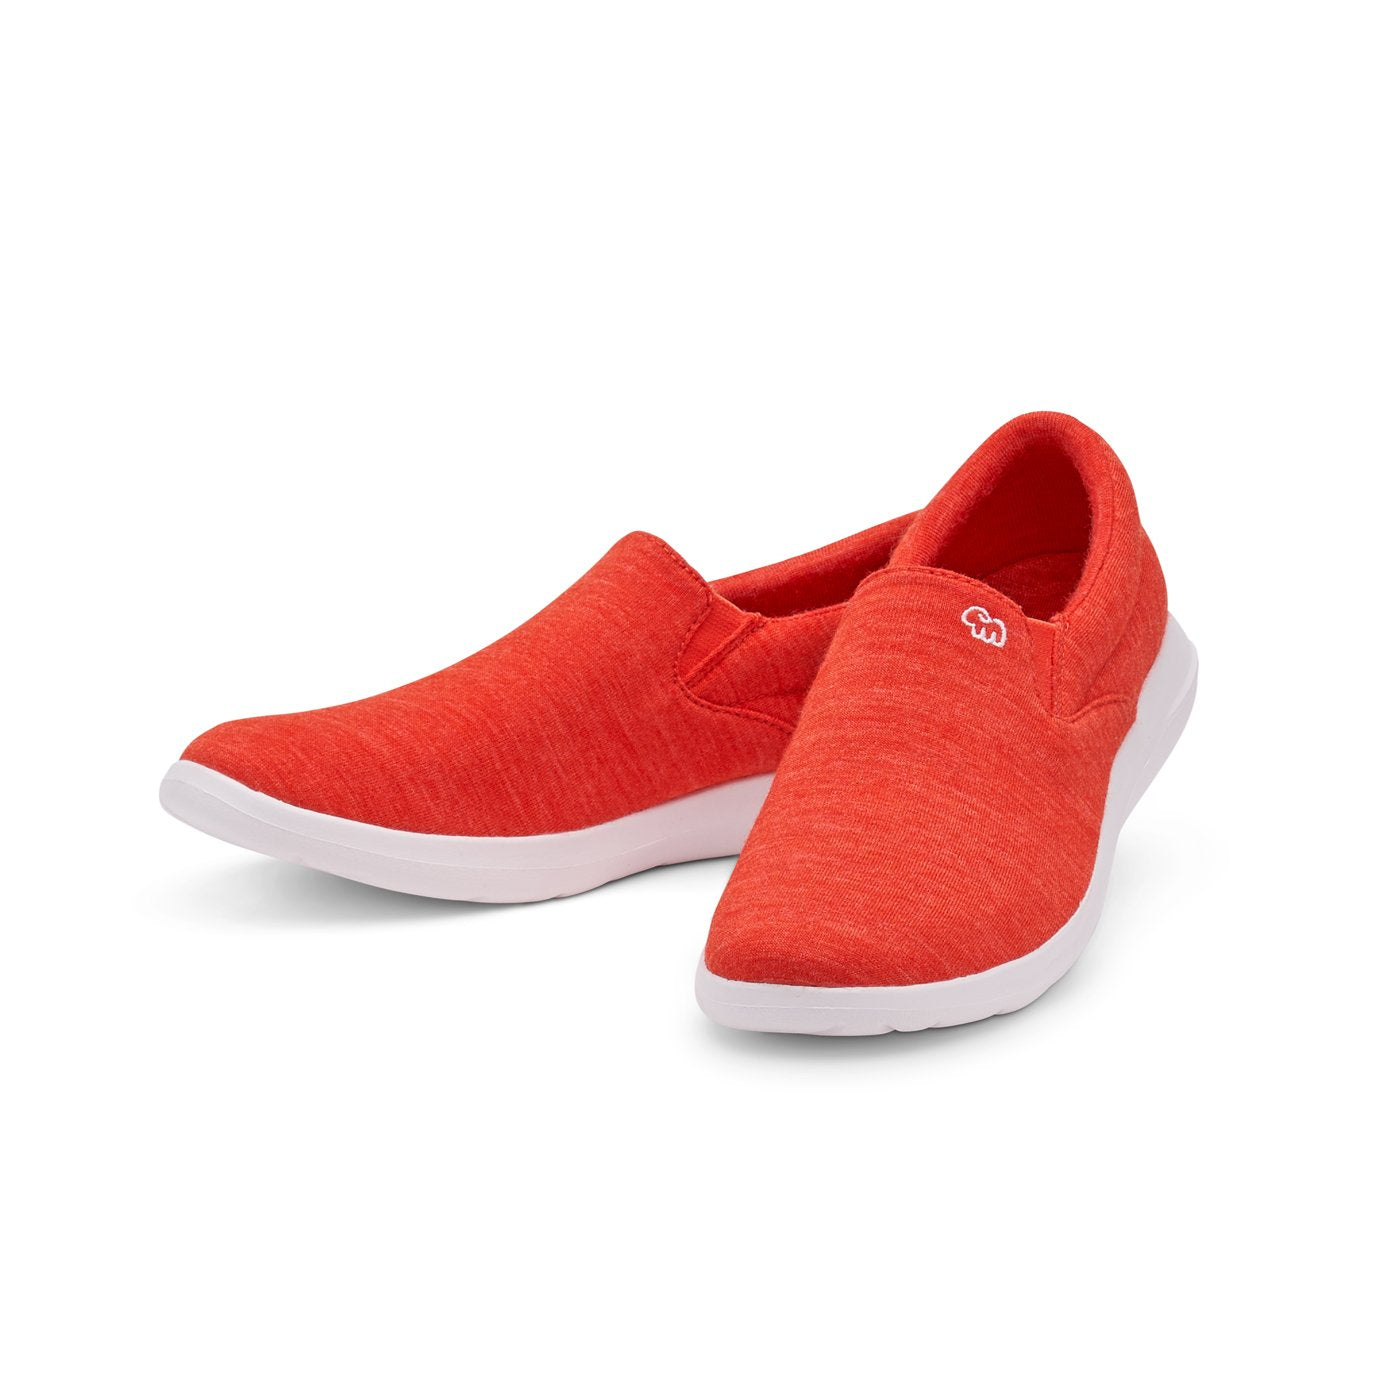 Women's Slip-Ons Coral - Special Offer